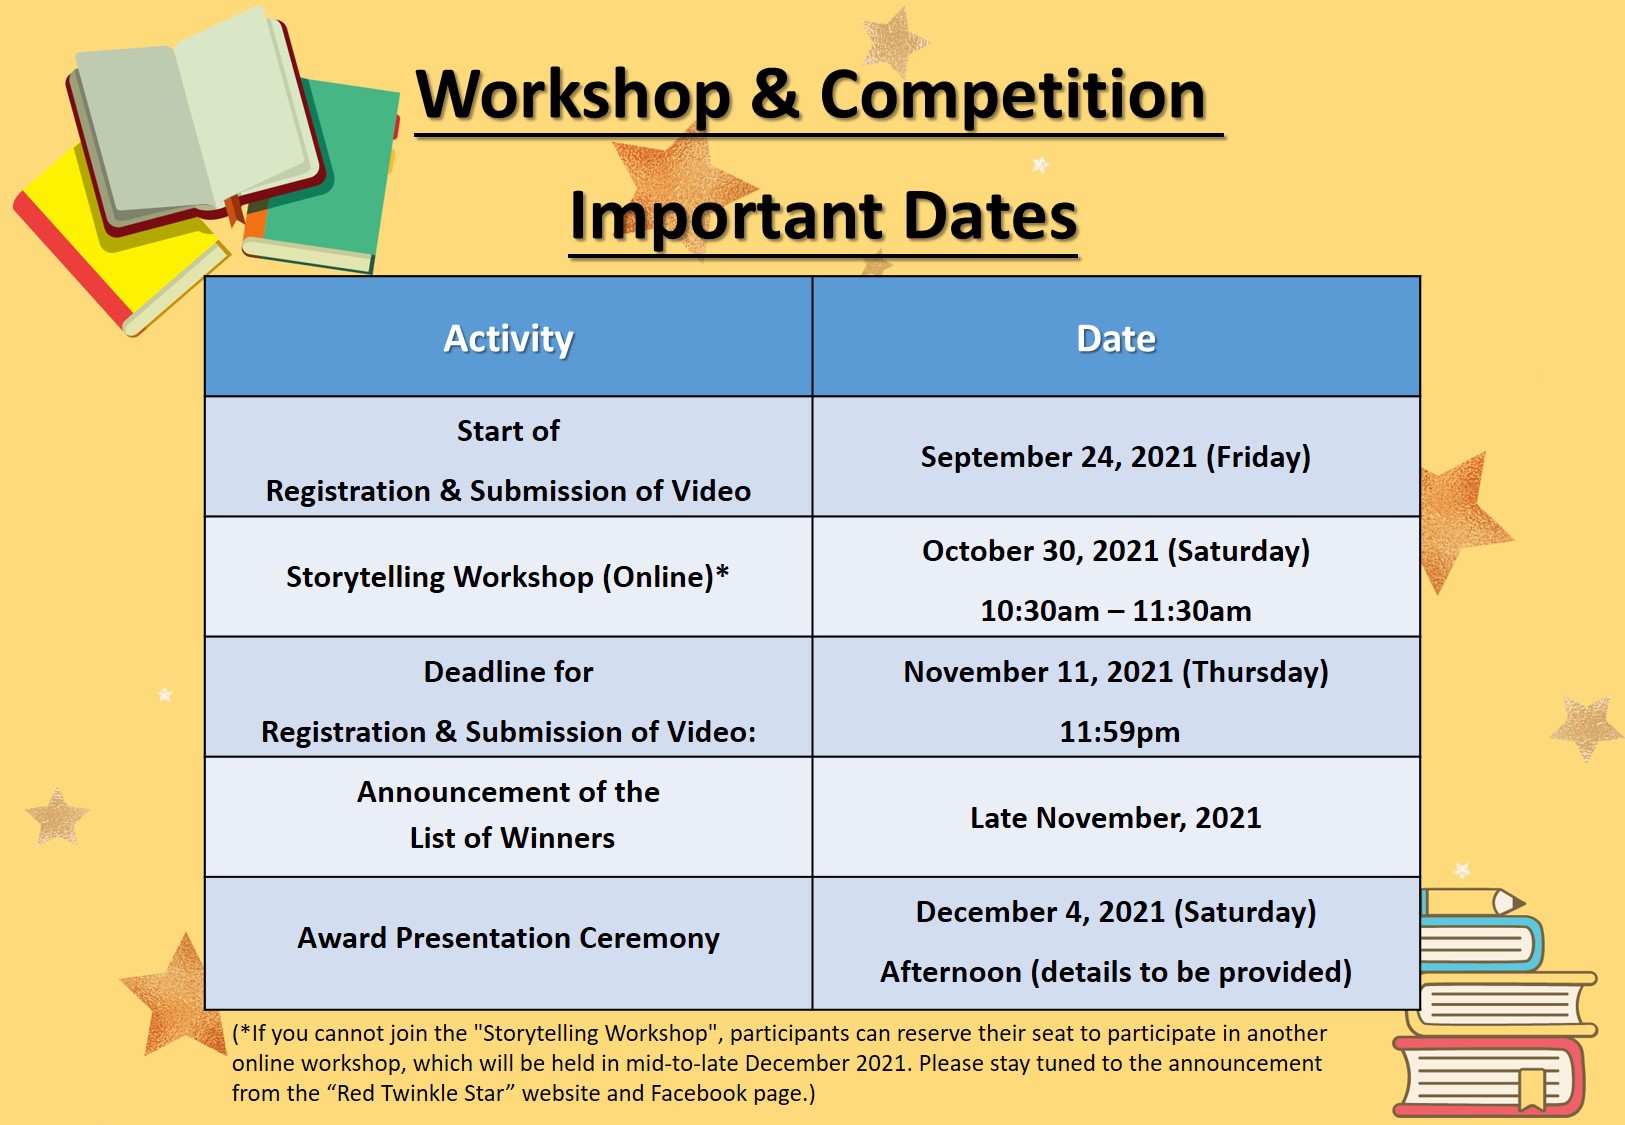 Self Photos / Files - Workshop & Competition